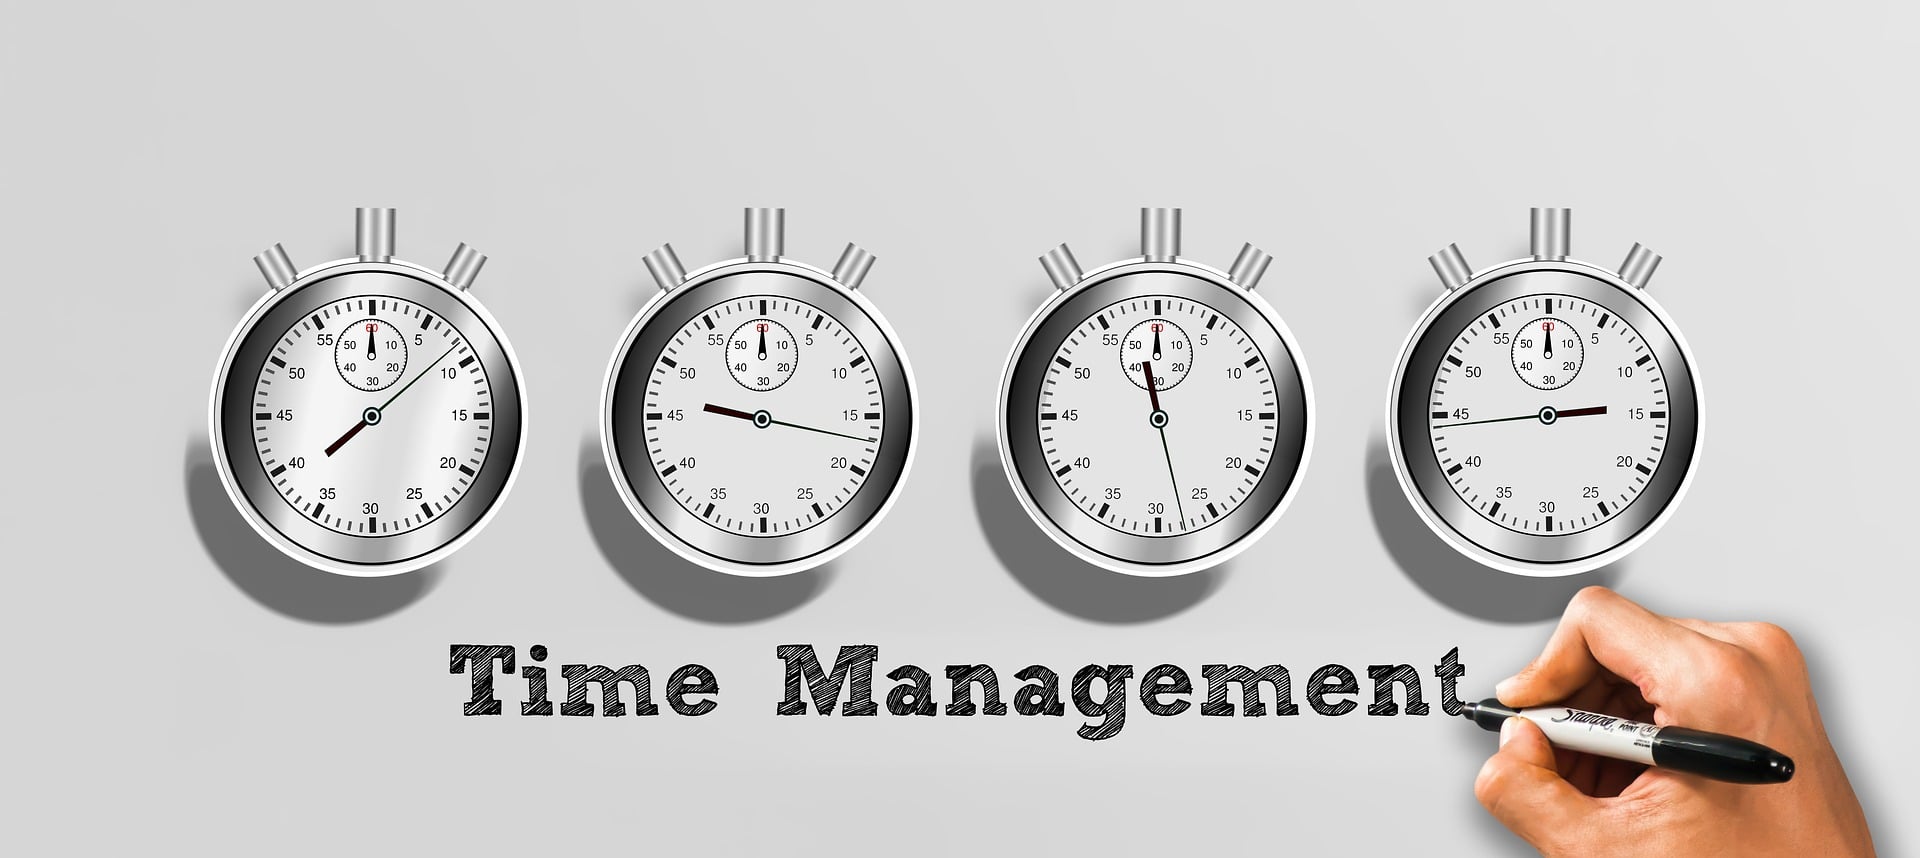 Stopwatches depicting time management